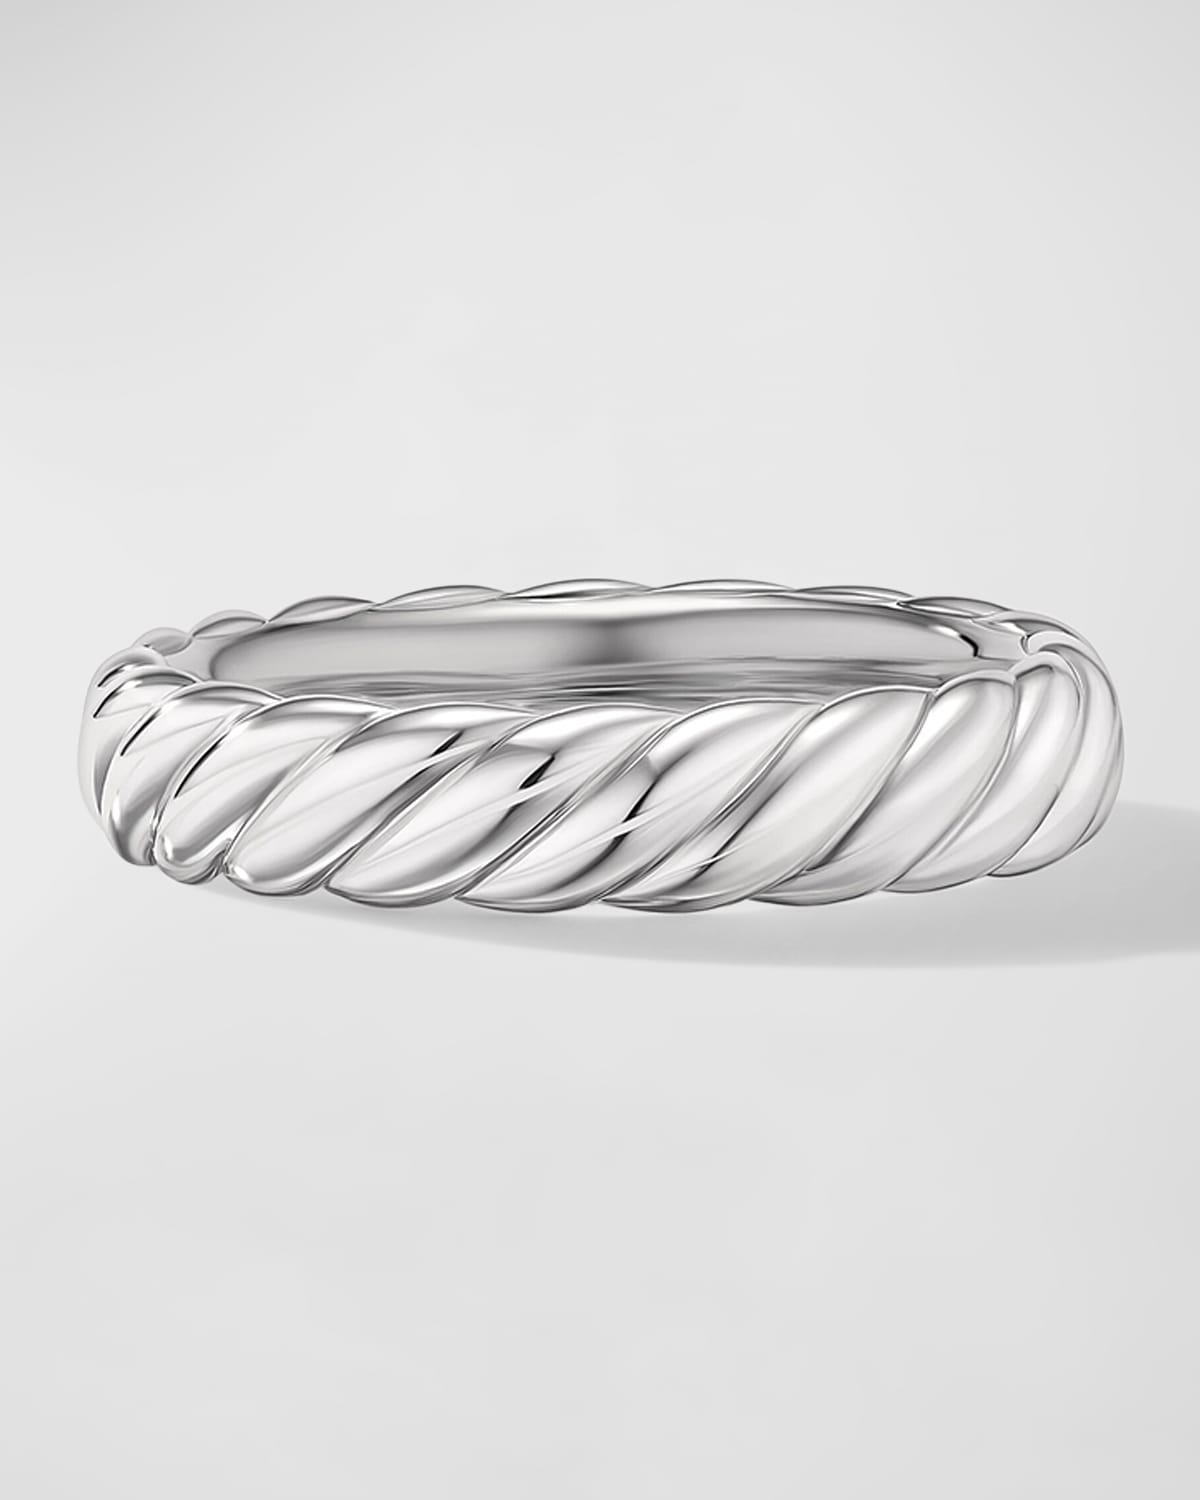 DAVID YURMAN SCULPTED CABLE BAND RING IN 18K WHITE GOLD, 4.5MM